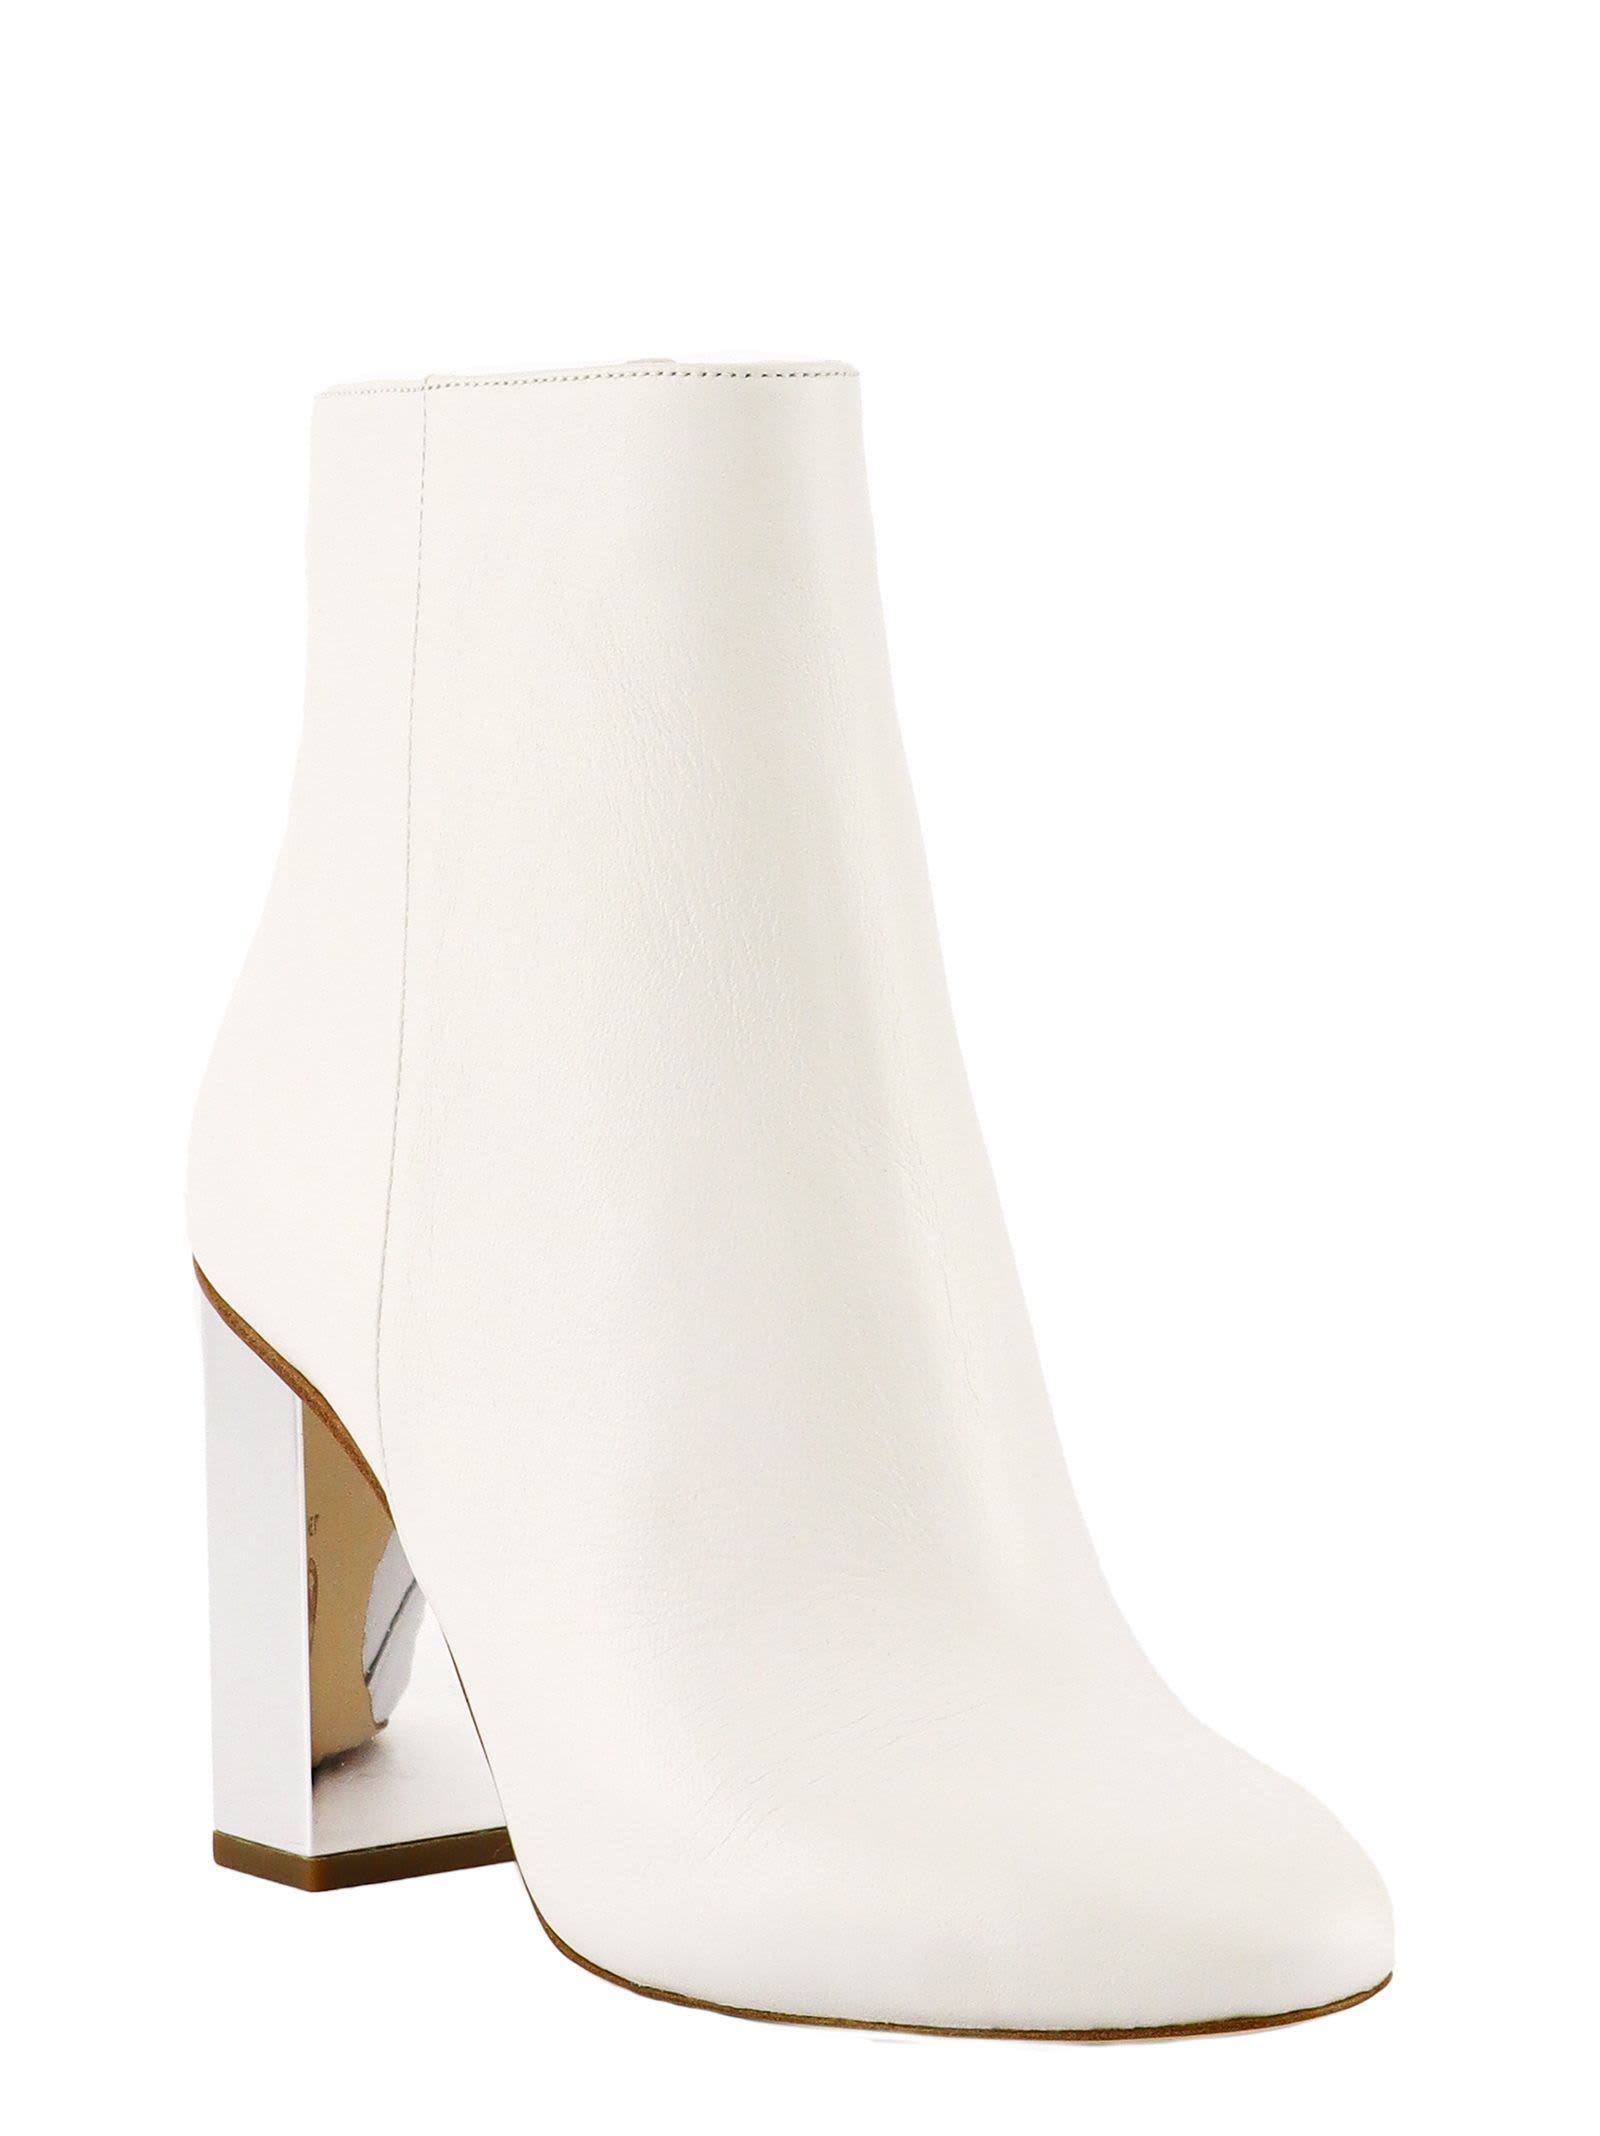 Michael Kors Petra Ankle Boots White 